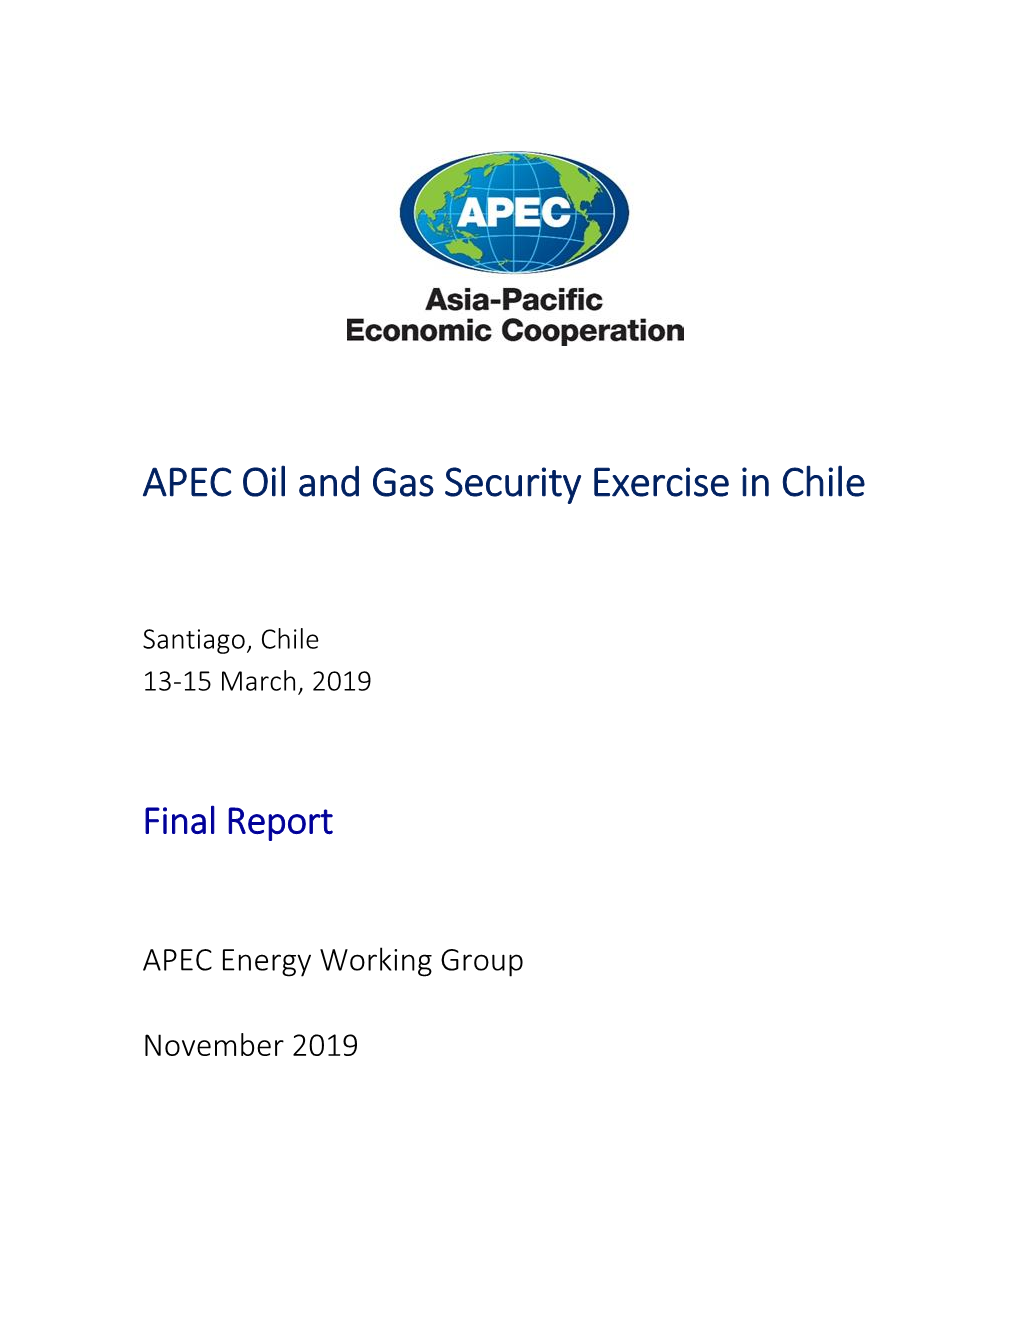 APEC Oil and Gas Security Exercise in Chile